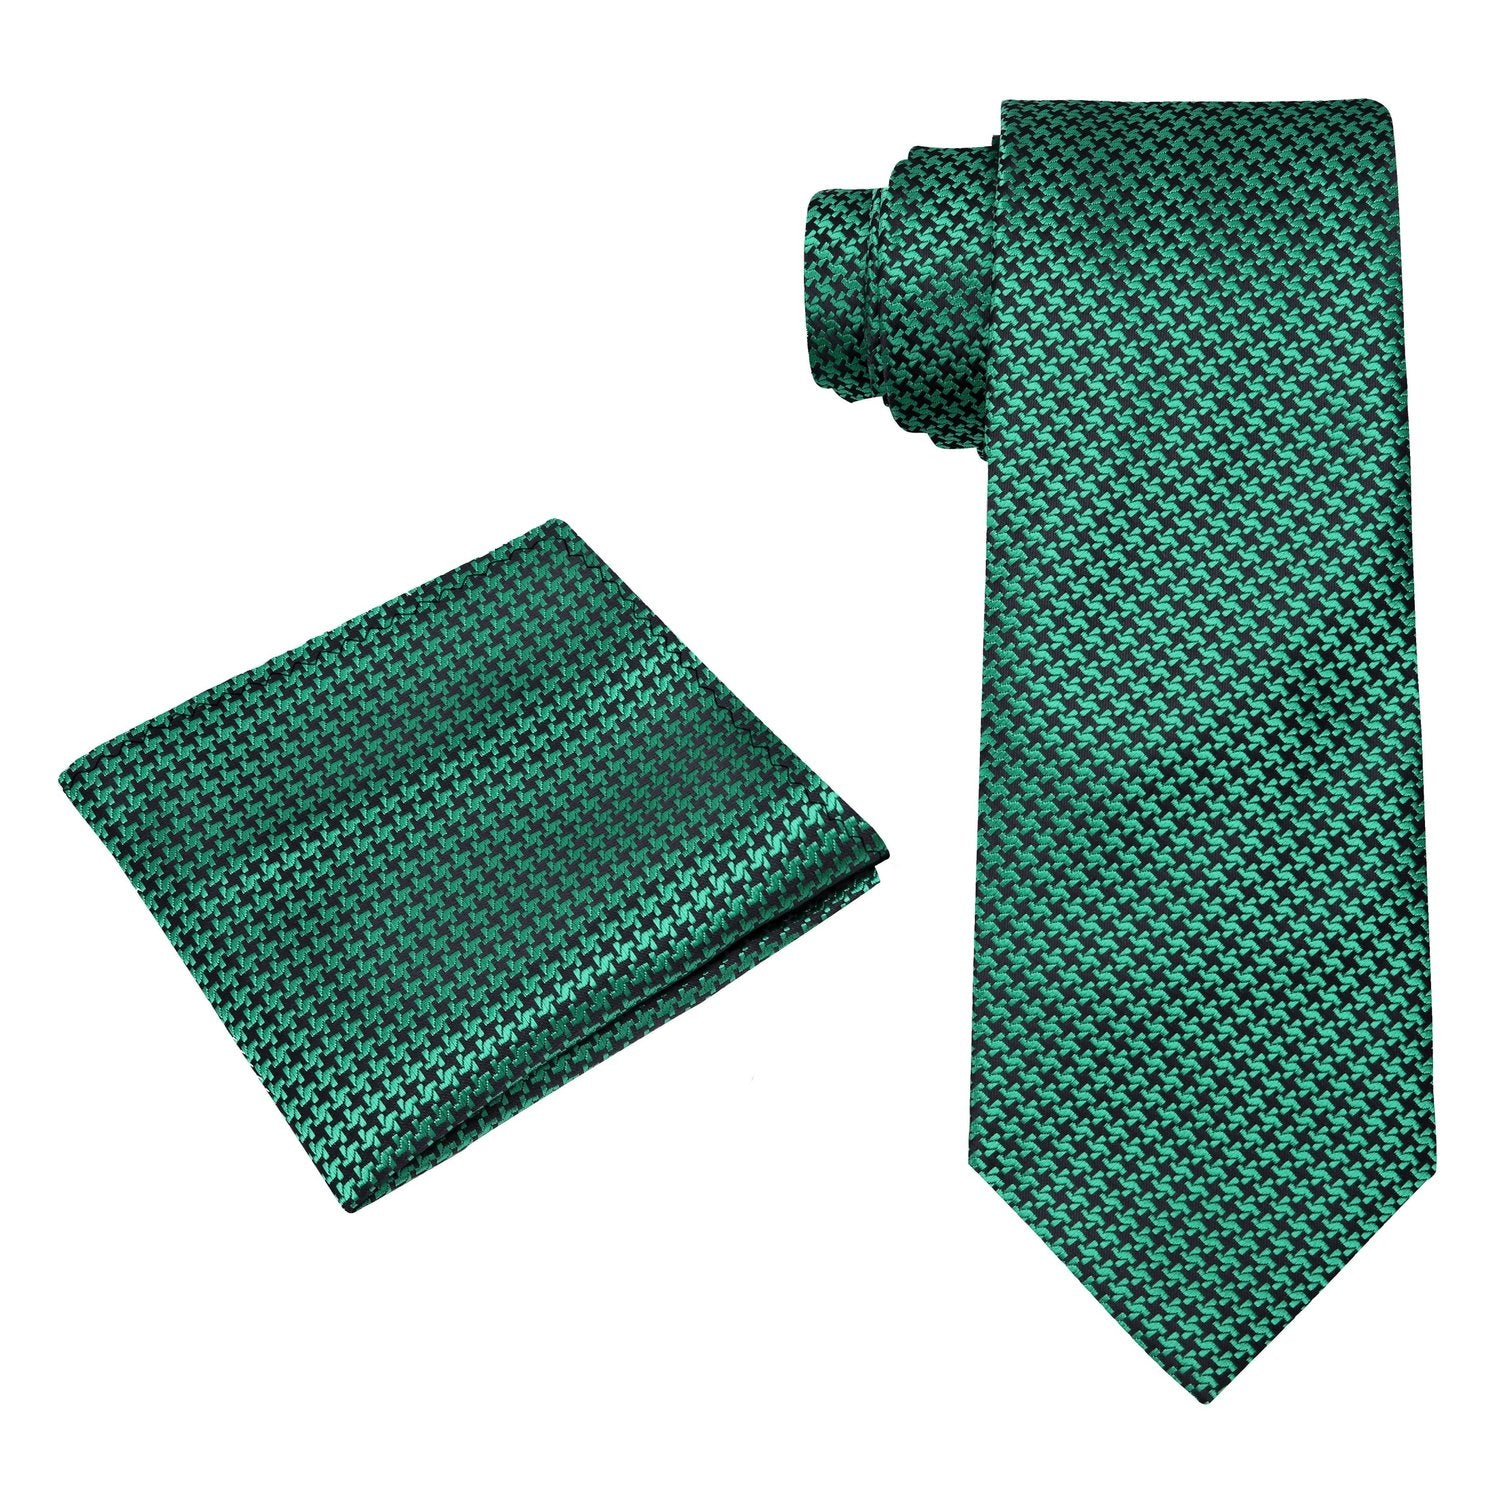 Alt View: Green, Black Hounds Tooth Tie and Square